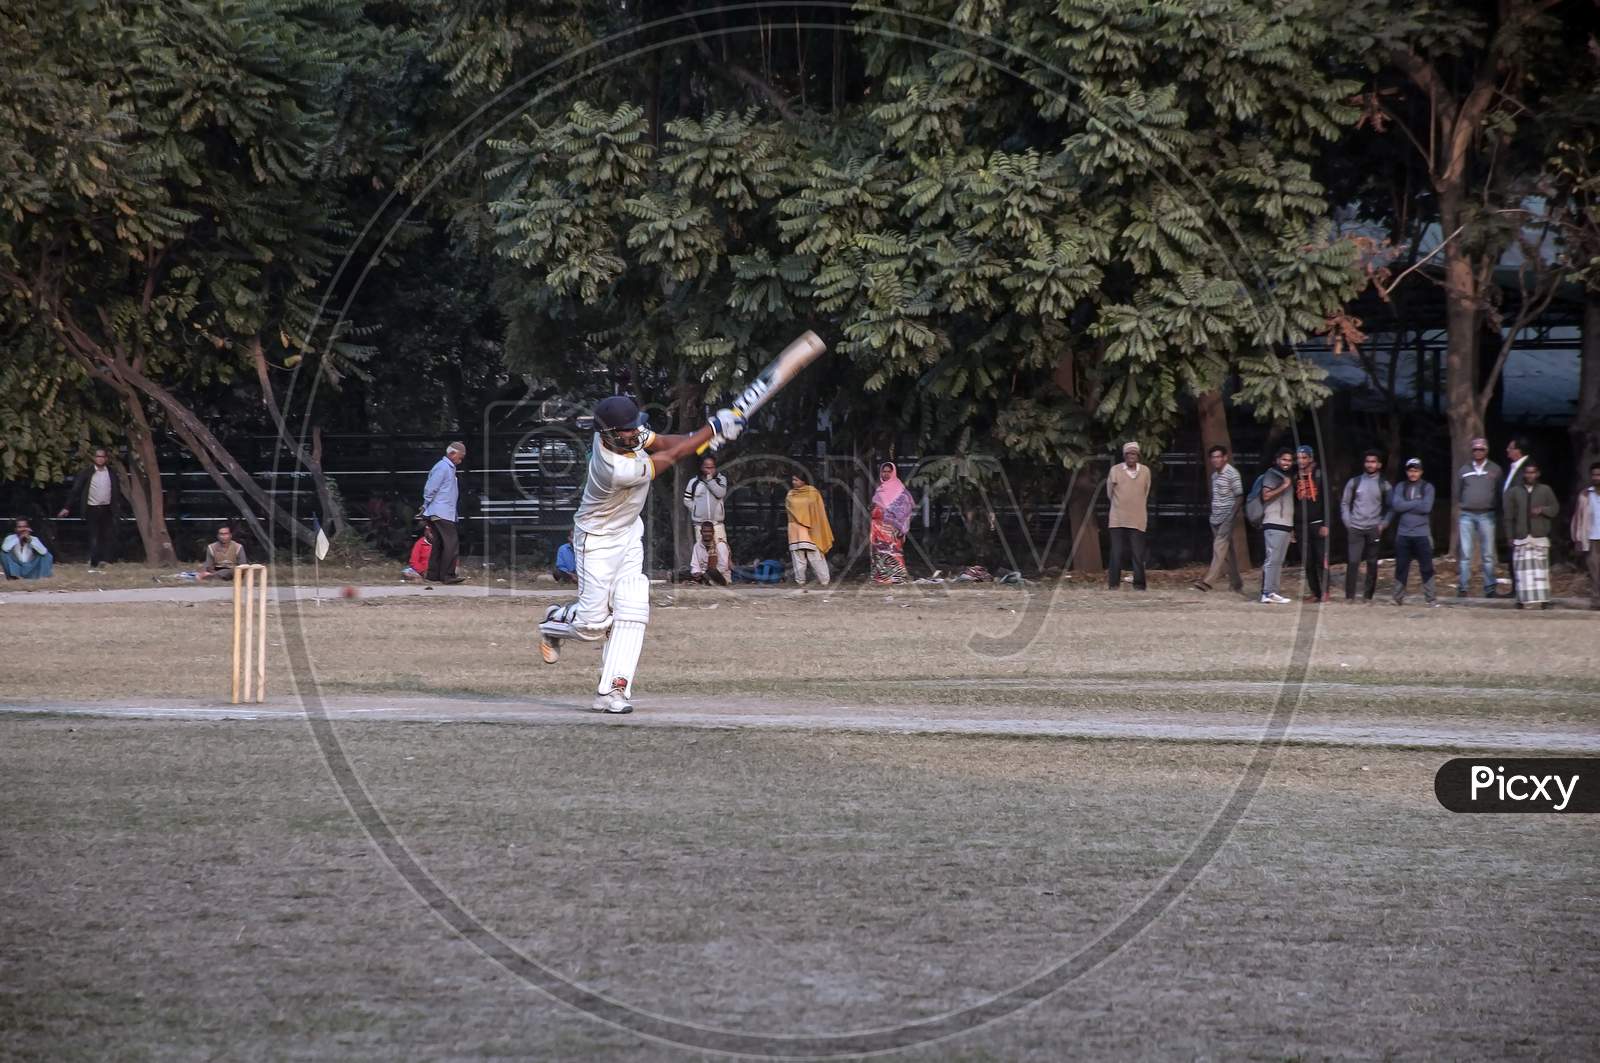 The batsman in action in a cricket ground.